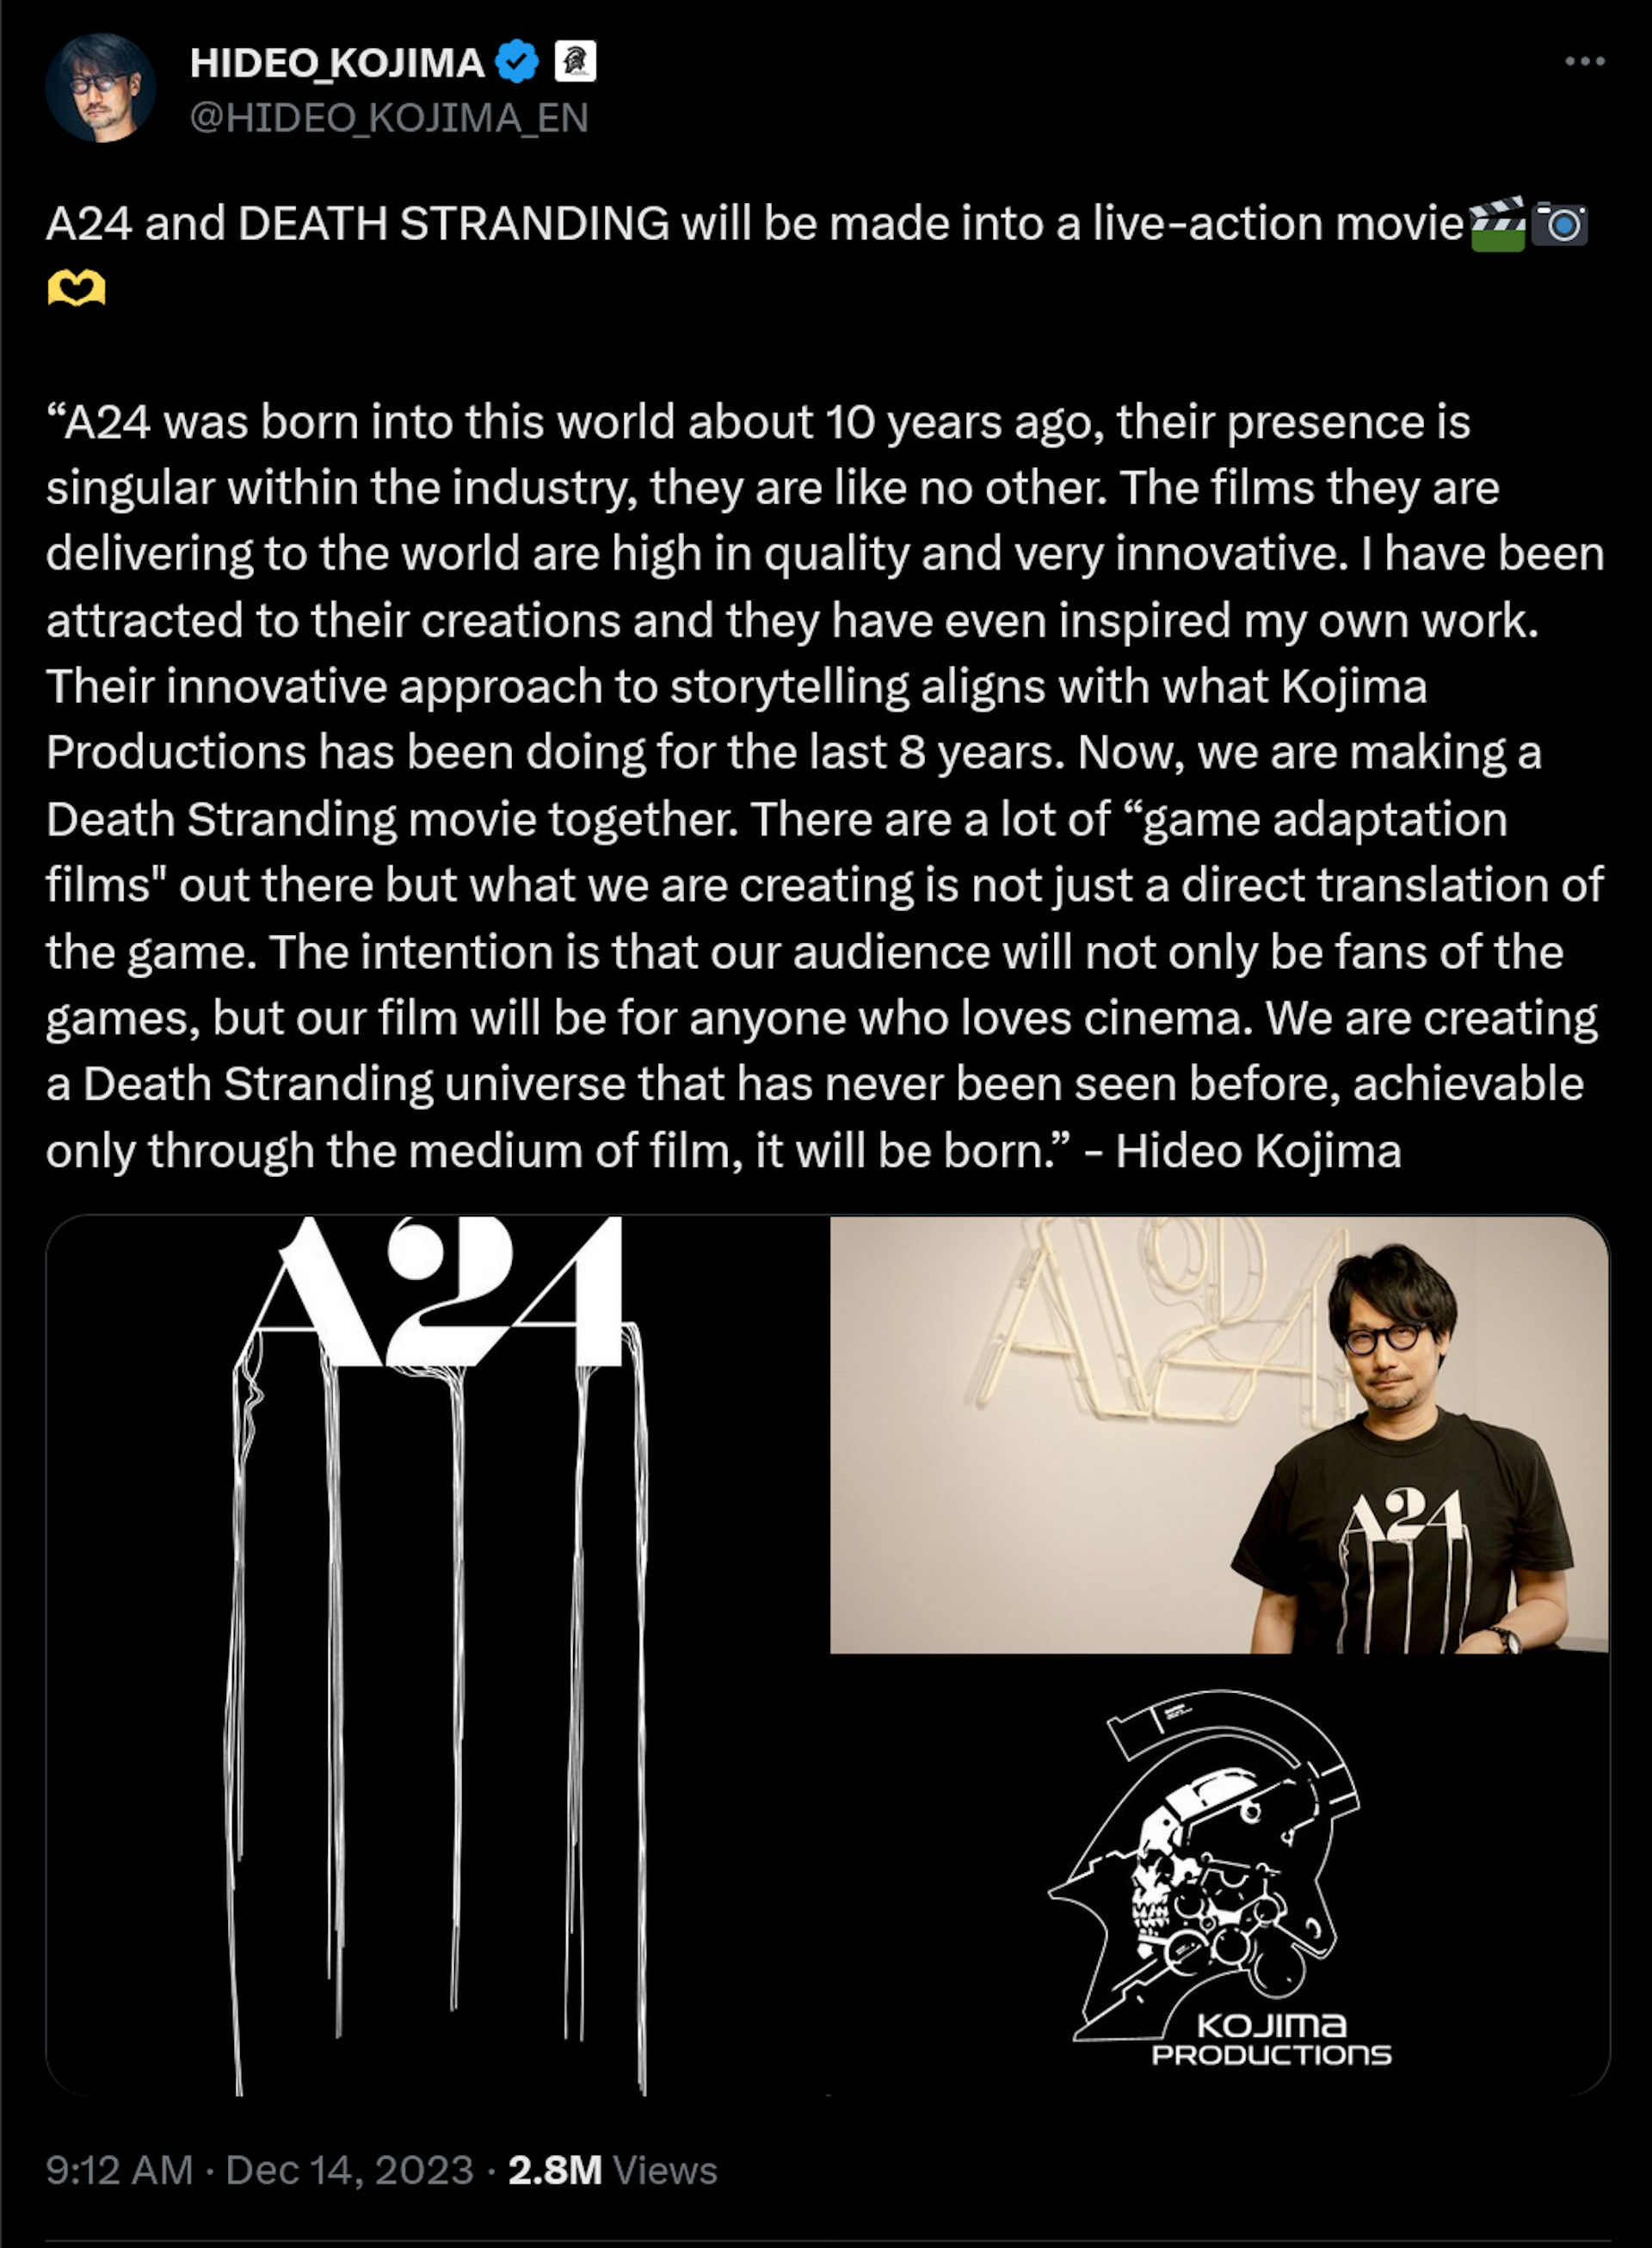 A24 and DEATH STRANDING will be made into a live-action movie????????????  “A24 was born into this world about 10 years ago, their presence is singular within the industry, they are like no other. The films they are delivering to the world are high in quality and very innovative. I have been attracted to their creations and they have even inspired my own work. Their innovative approach to storytelling aligns with what Kojima Productions has been doing for the last 8 years. Now, we are making a Death Stranding movie together. There are a lot of “game adaptation films